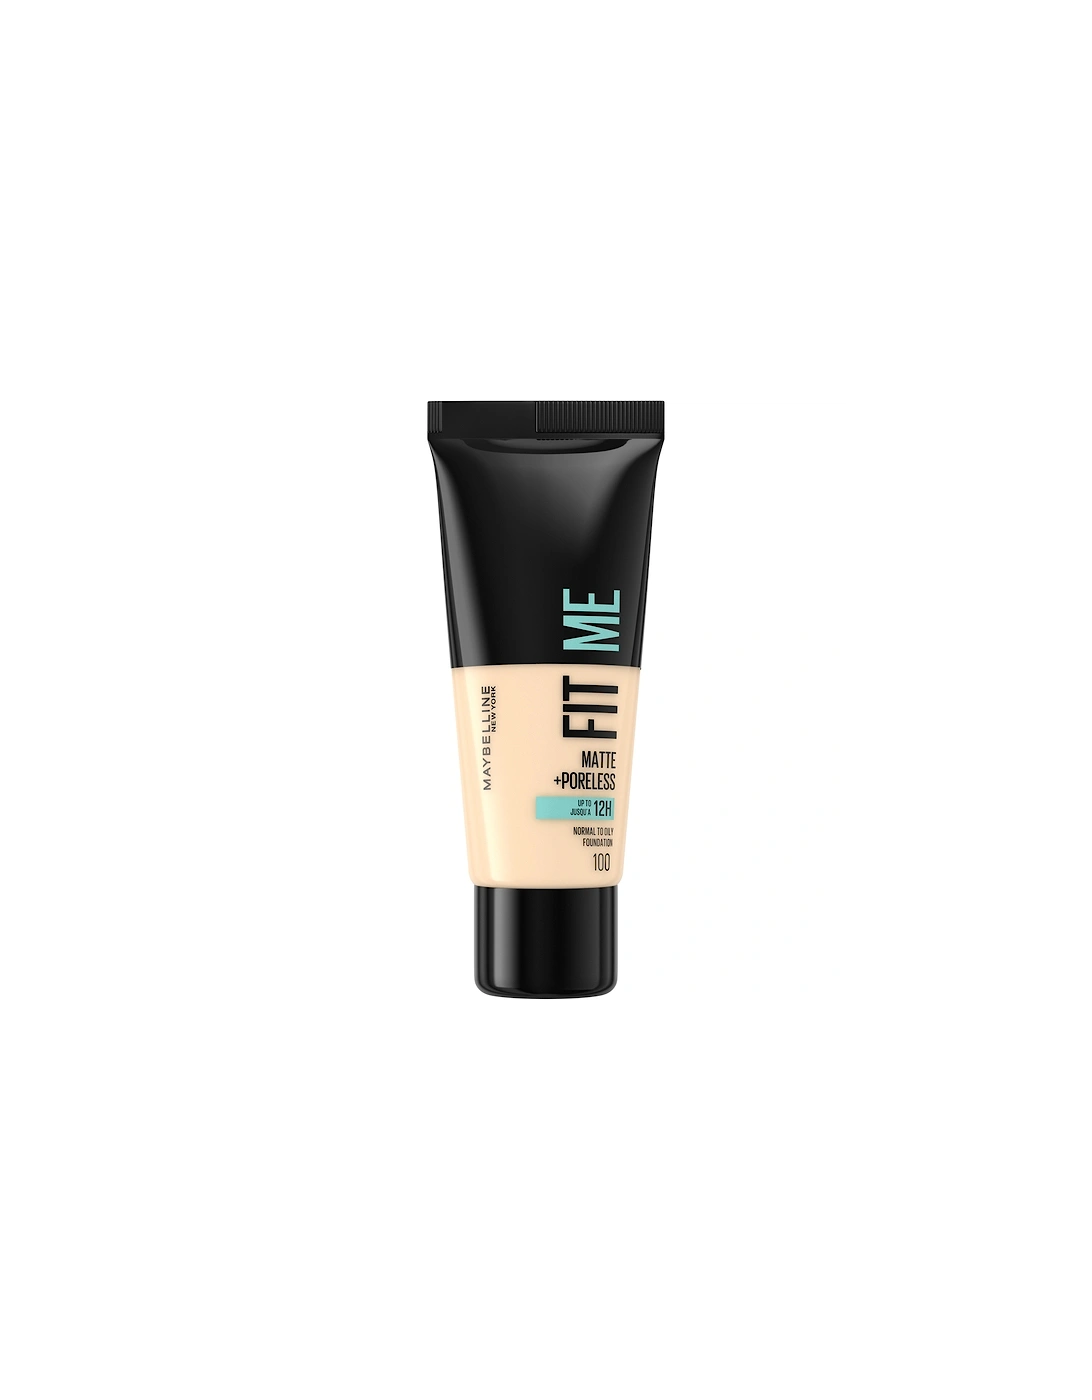 Fit Me! Matte and Poreless Foundation - 100 Warm Ivory - - Fit Me! Matte and Poreless Foundation 30ml (Various Shades) - Foundation - Fit Me! Matte and Poreless Foundation 30ml (Various Shades) - Tina - Fit Me! Matte and Poreless Foundation 30ml (Various Shades) - Jo, 2 of 1